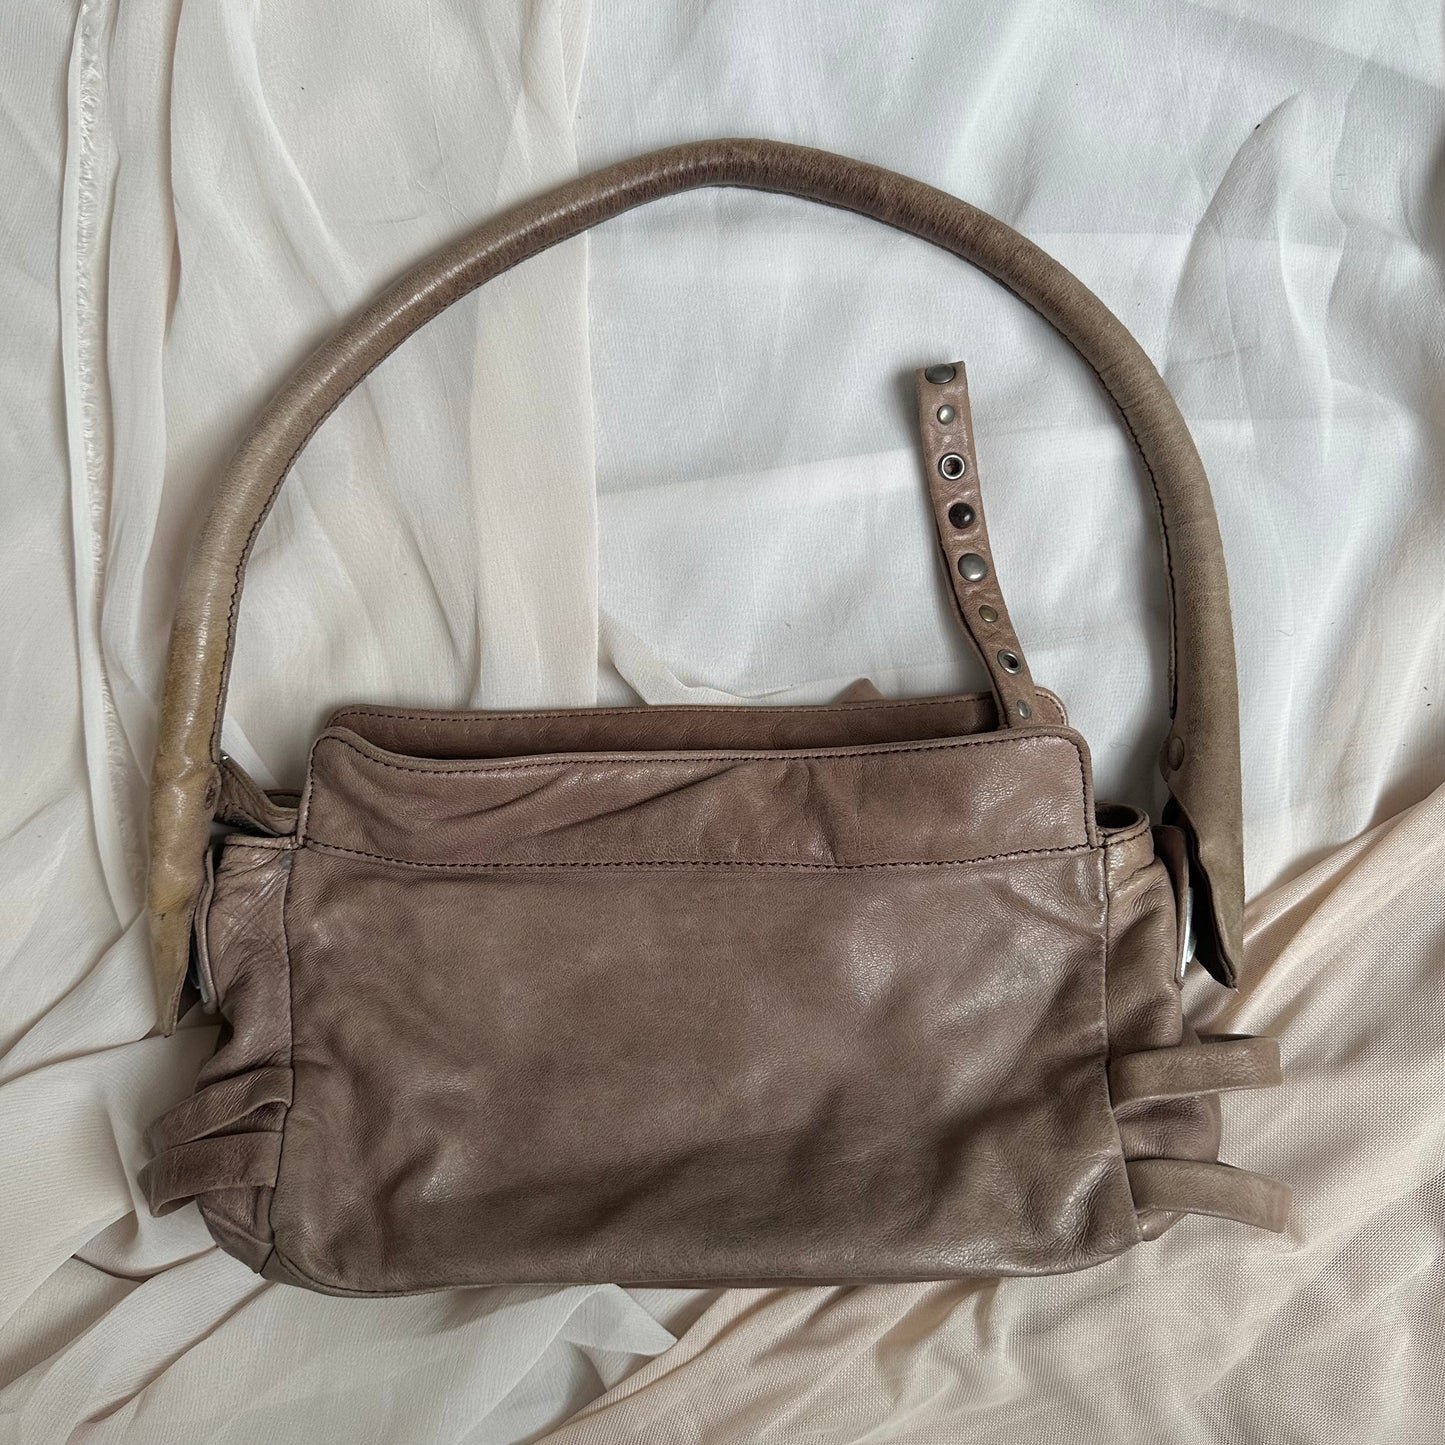 MODULAR LEATHER SHOULDER BAG IN PALE TAUPE by Diesel